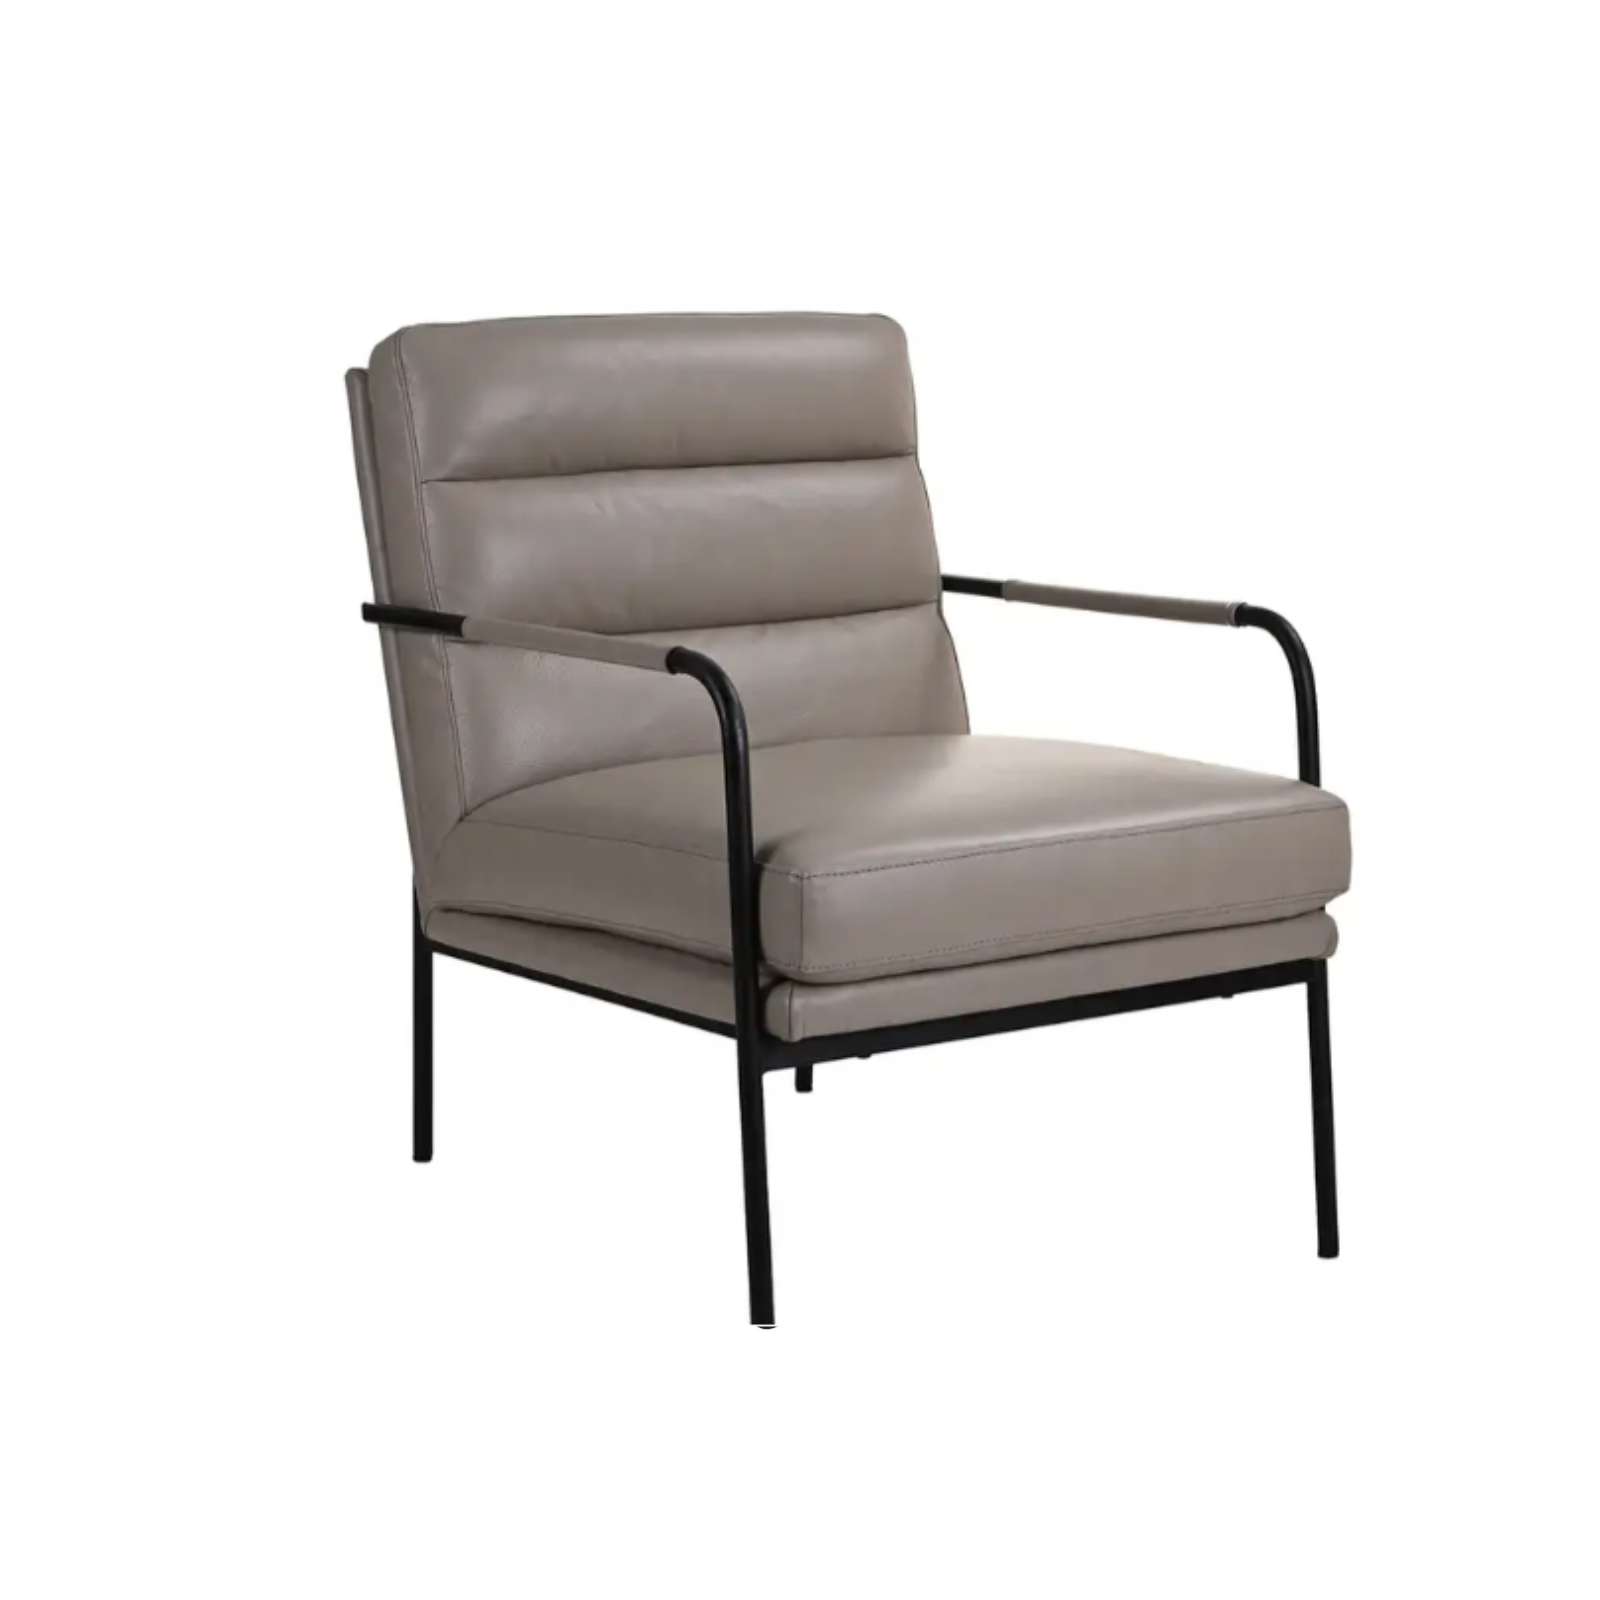 Valerie Lounge Chair - Sculptors Clay